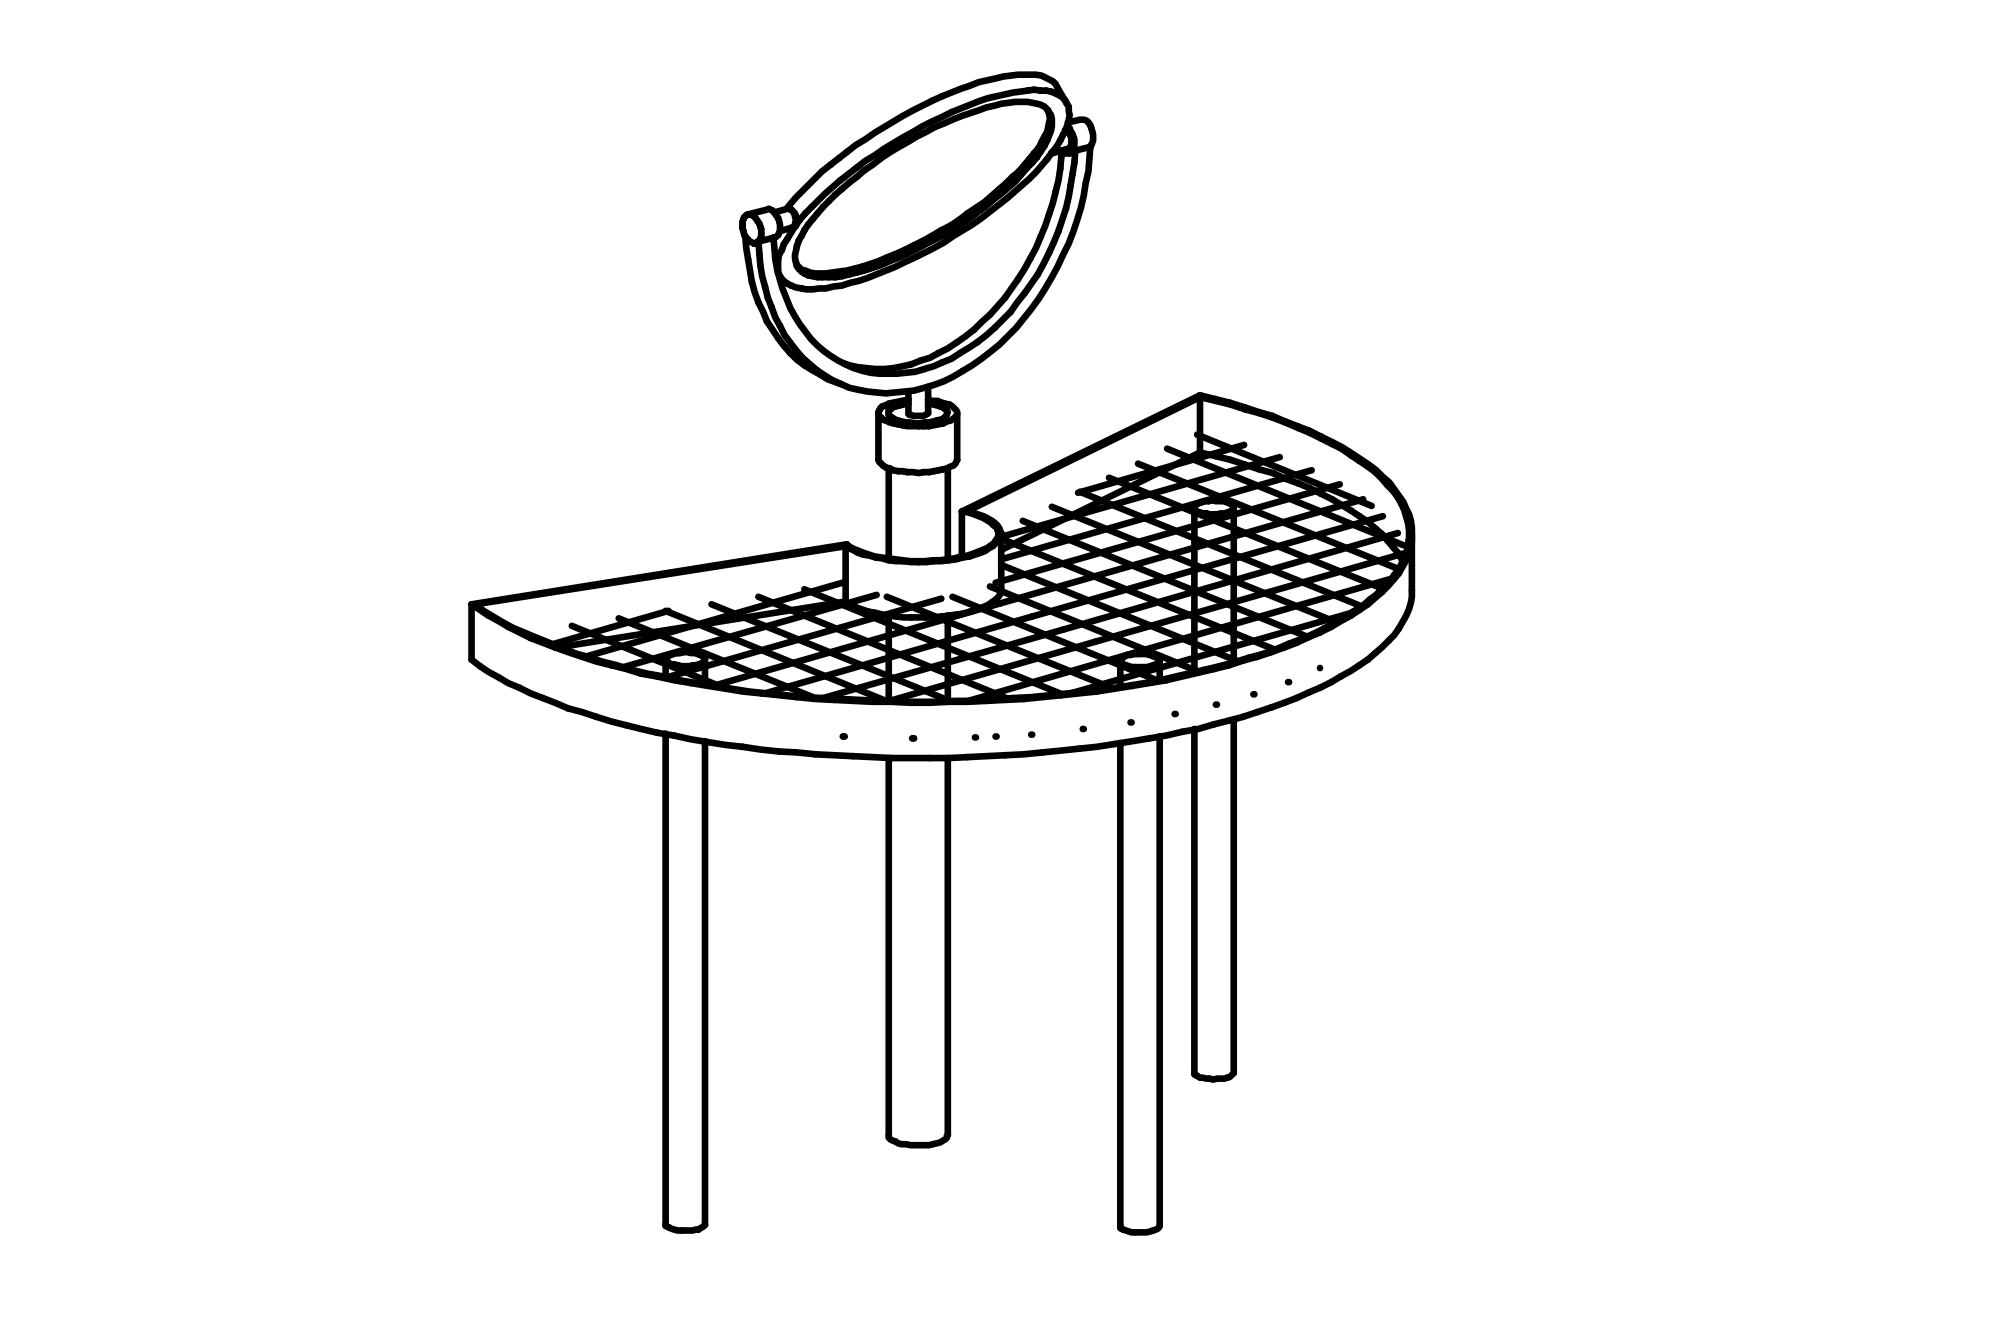 Magnifying Lens with Table